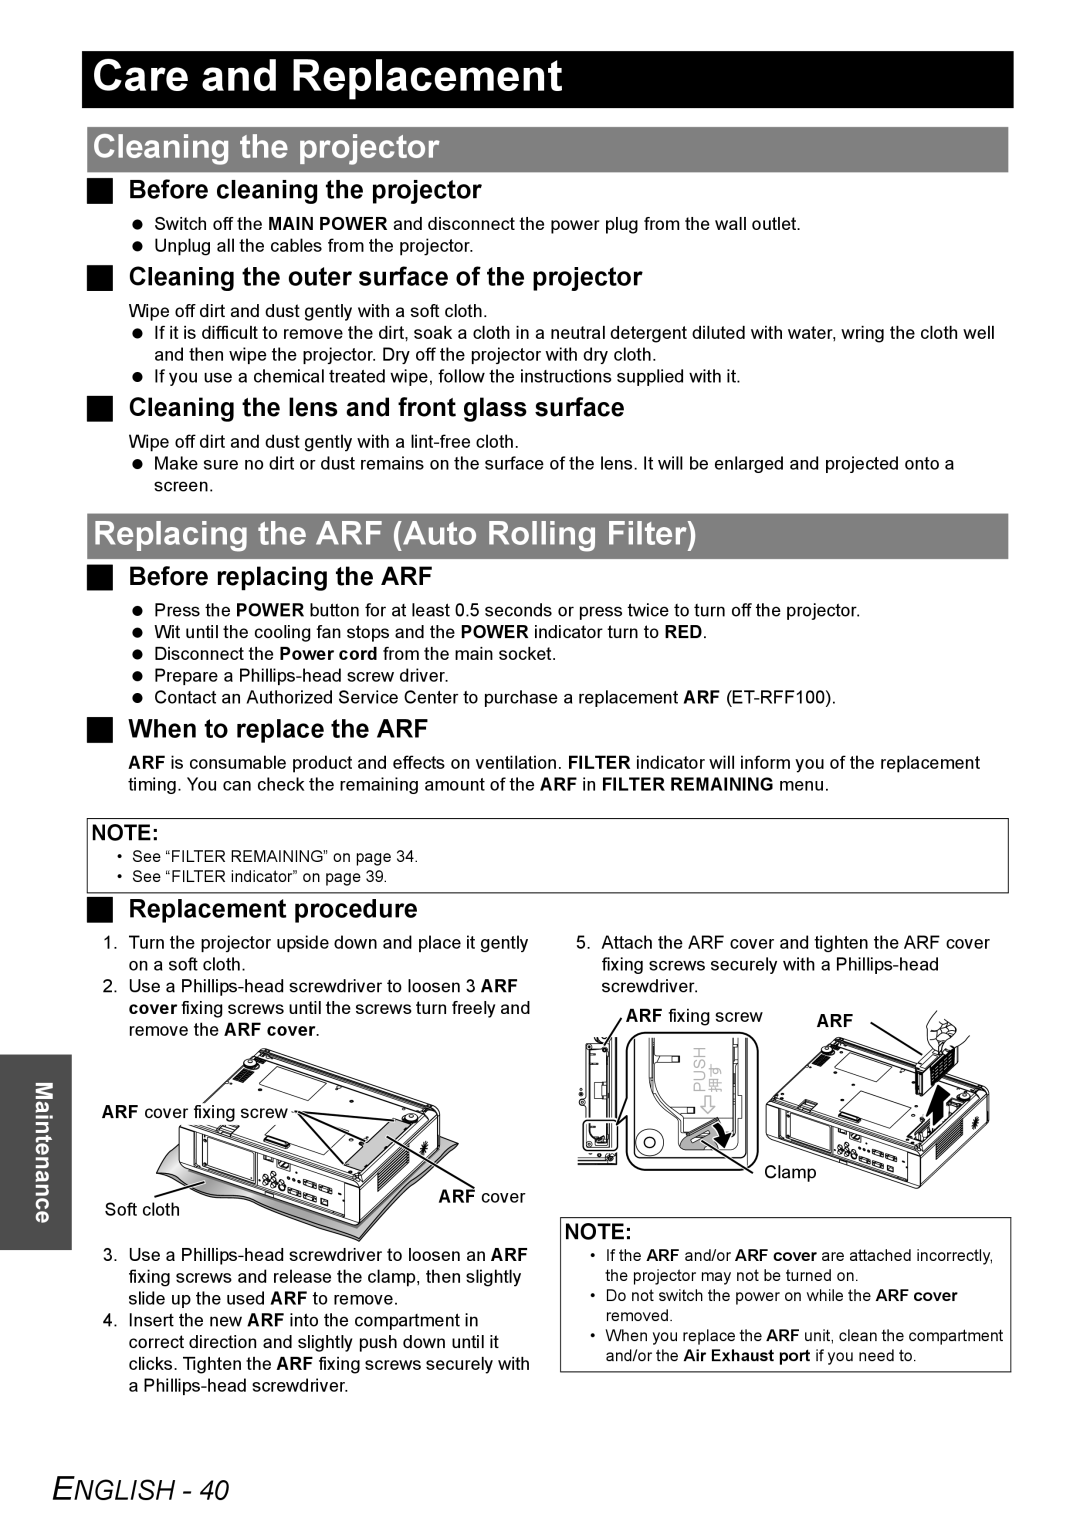 Panasonic PT-FW100NTU manual Care and Replacement, Cleaning the projector, Replacing the ARF Auto Rolling Filter, English 